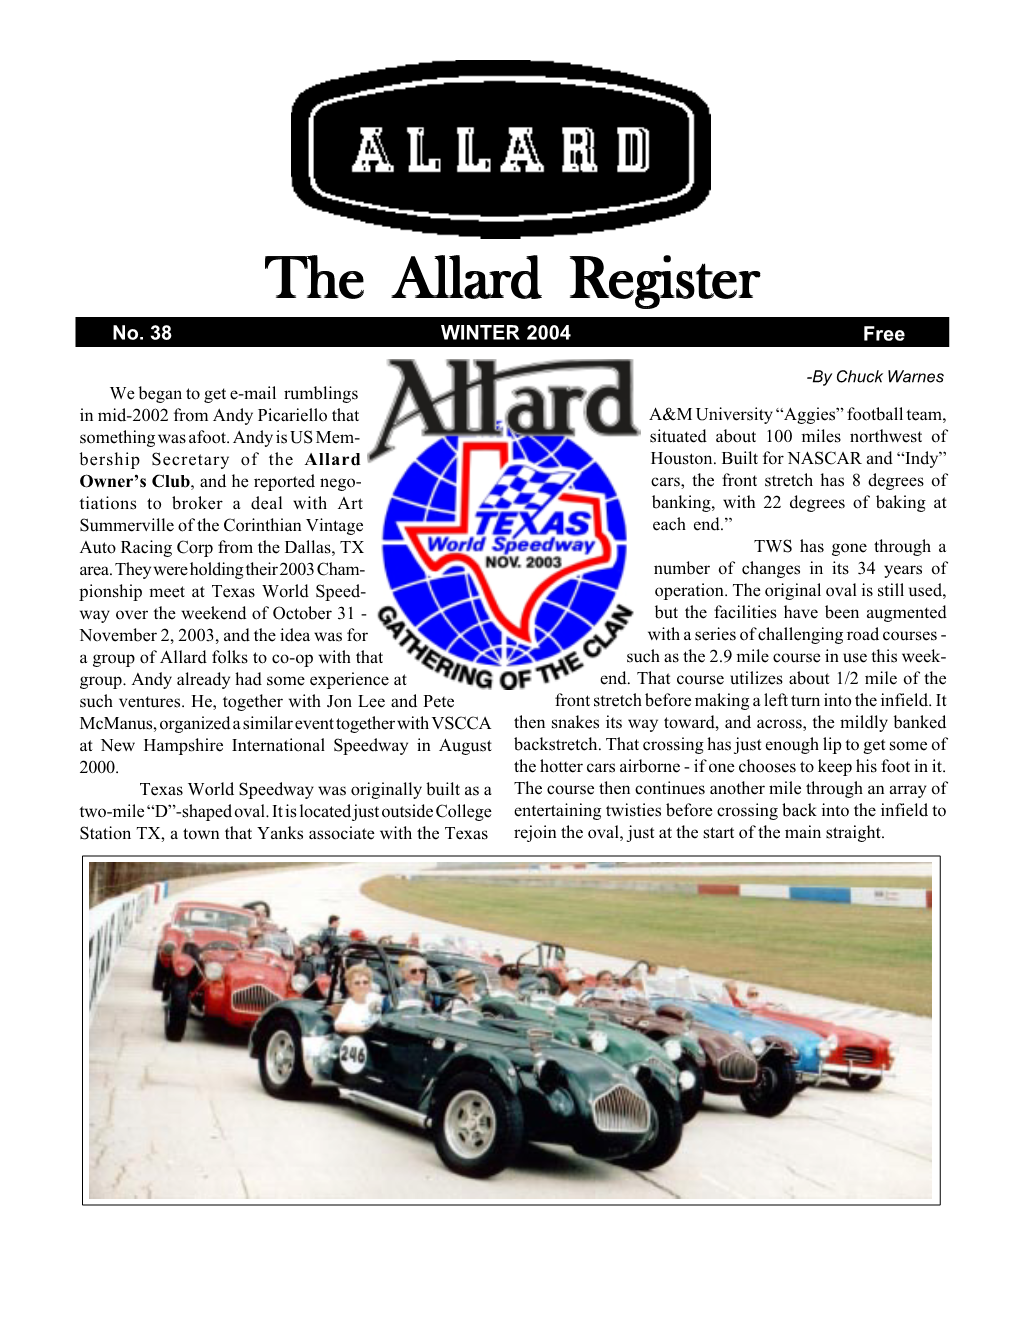 The Allard Register 2 Gathering of the Clan, Continued